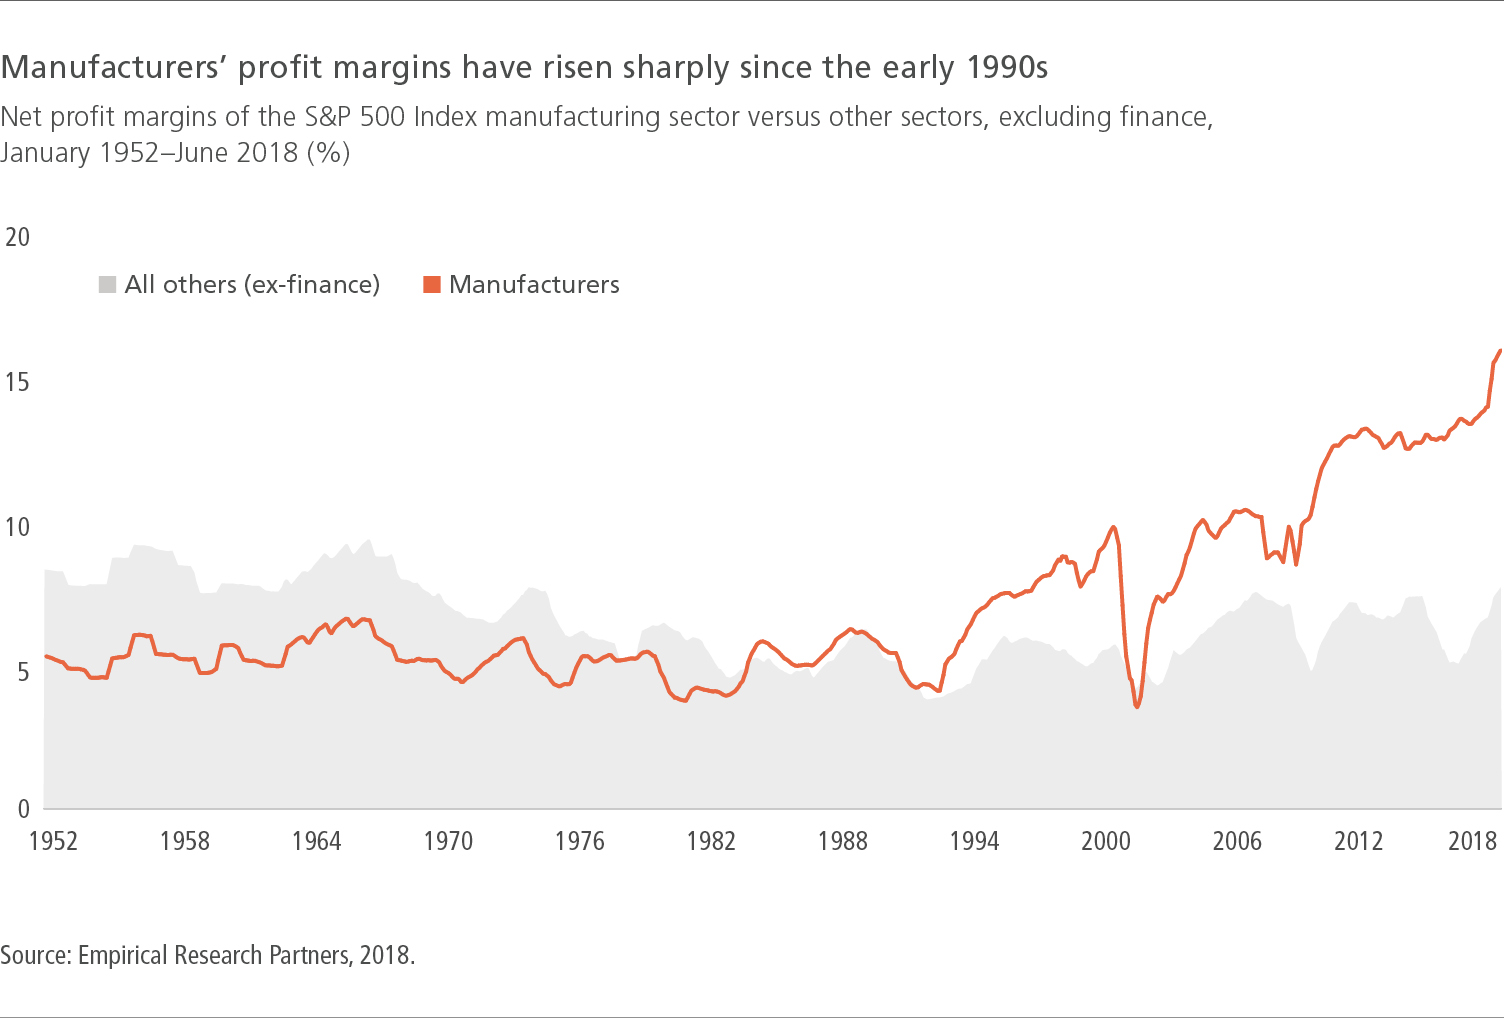 Manufacturers' profit margins have risen sharply since the early 1990s